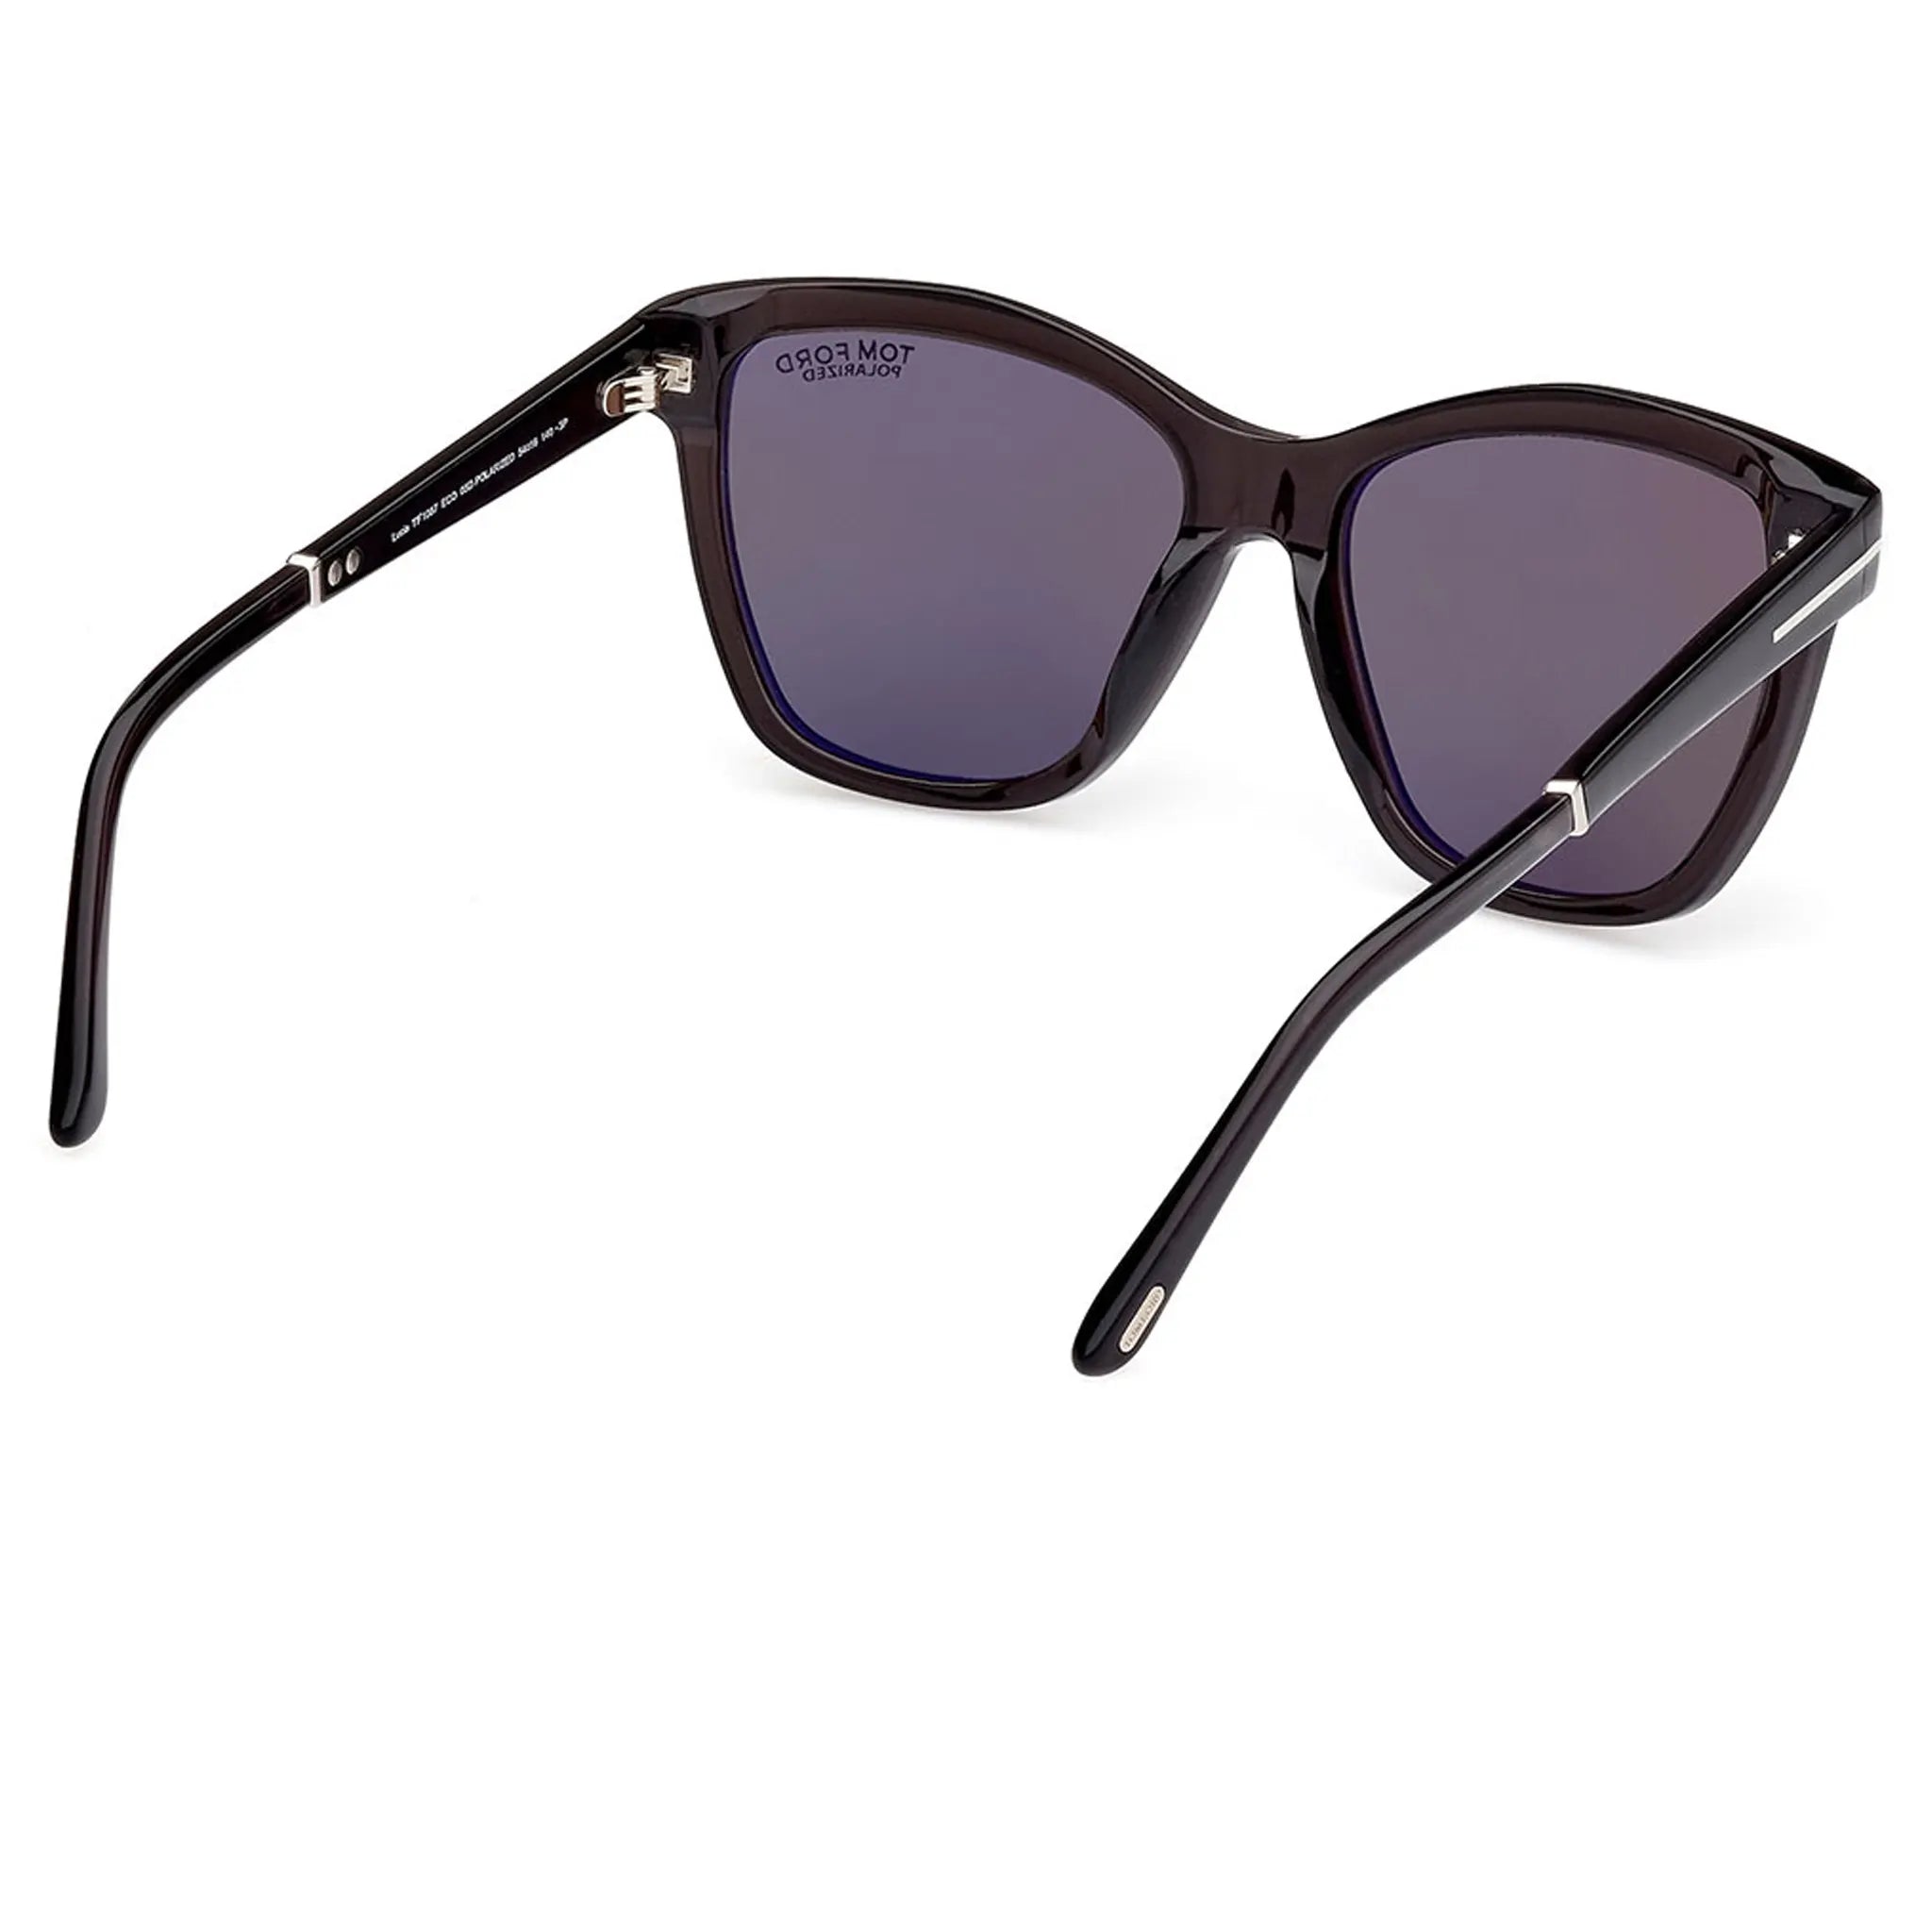 Back view of Tom Ford Lucia FT1087 05D Black Polarised Sunglasses